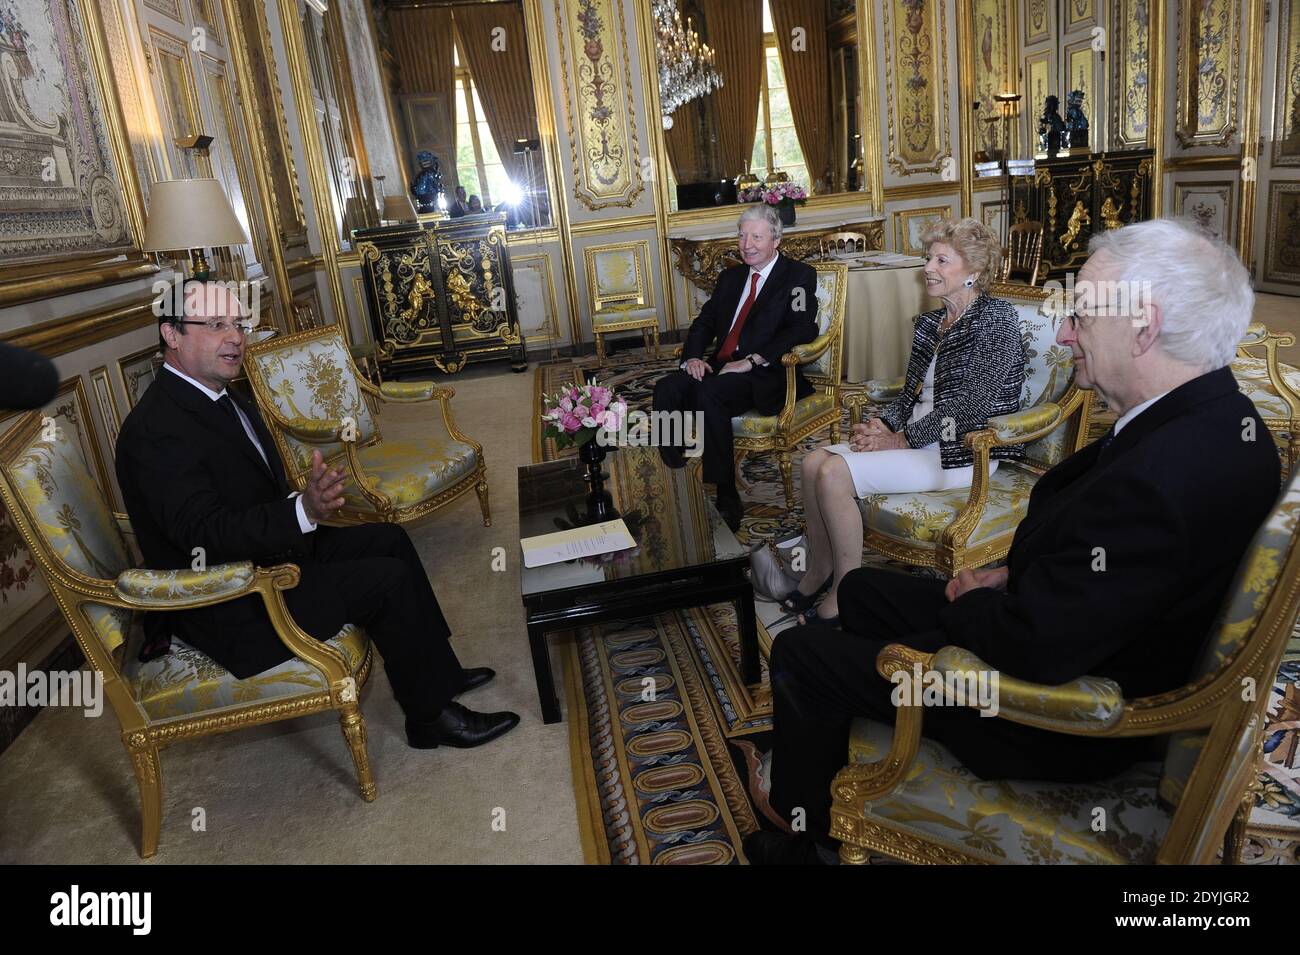 French president Francois Hollande (L) receives the permanent secretary of the Academie Française, Helene Carrere d'Encausse (2nd R), newly-elected member of the Academie Francaise, British poet and academic Michael Edwards (R) and President of the French Academy of Sciences, Luxembourg-born French biologist Jules Hoffmann (3rdR), at the Elysee Palace in Paris, France on April 22, 2013. Photo by Mousse/ABACAPRESS.COM Stock Photo